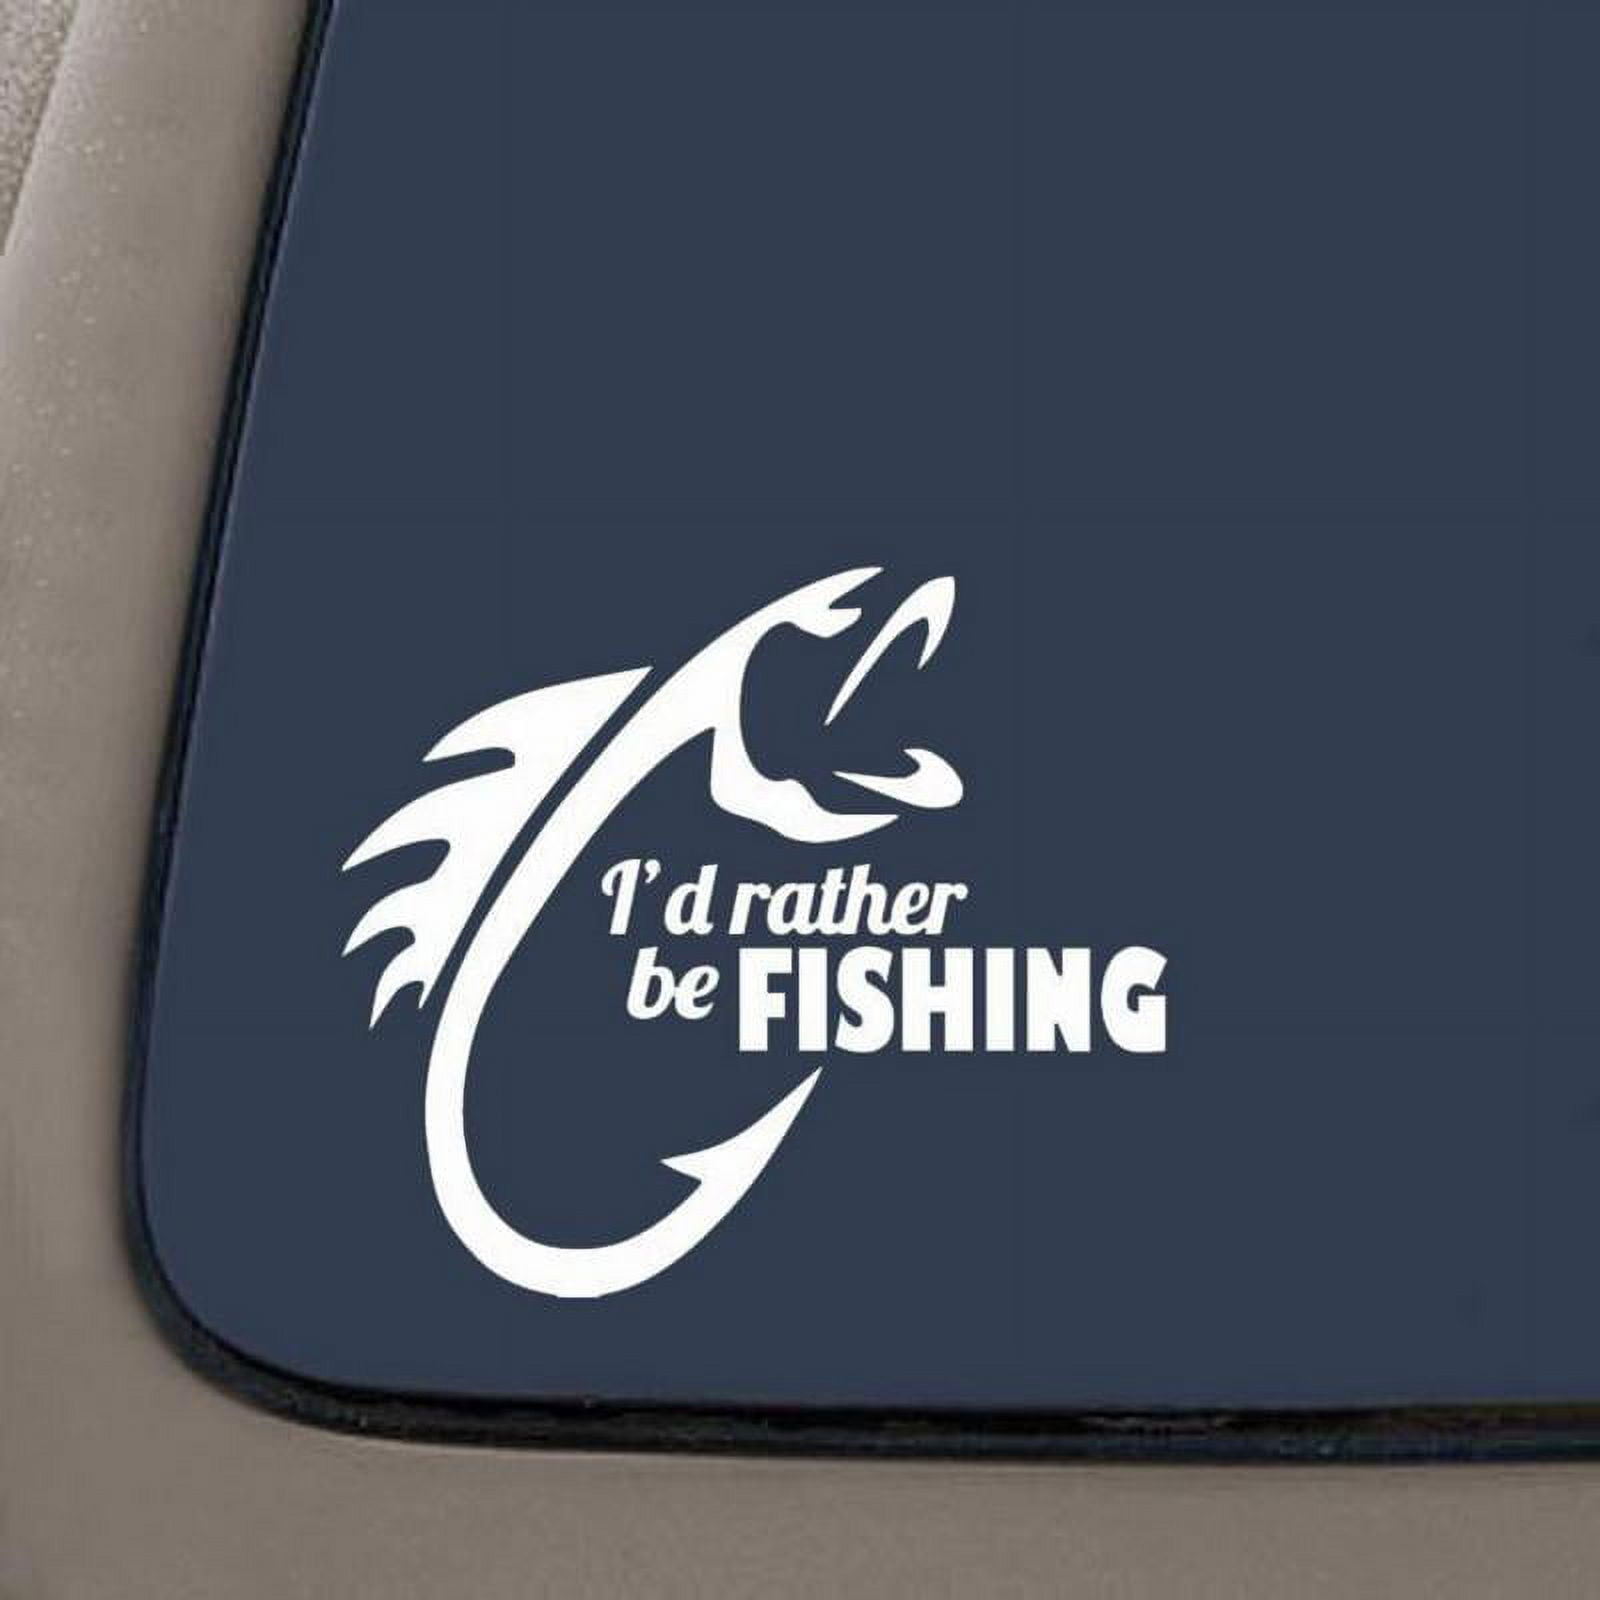 Fishing Boat Stickers Fishing Brand Decals Premium Outdoor Quality